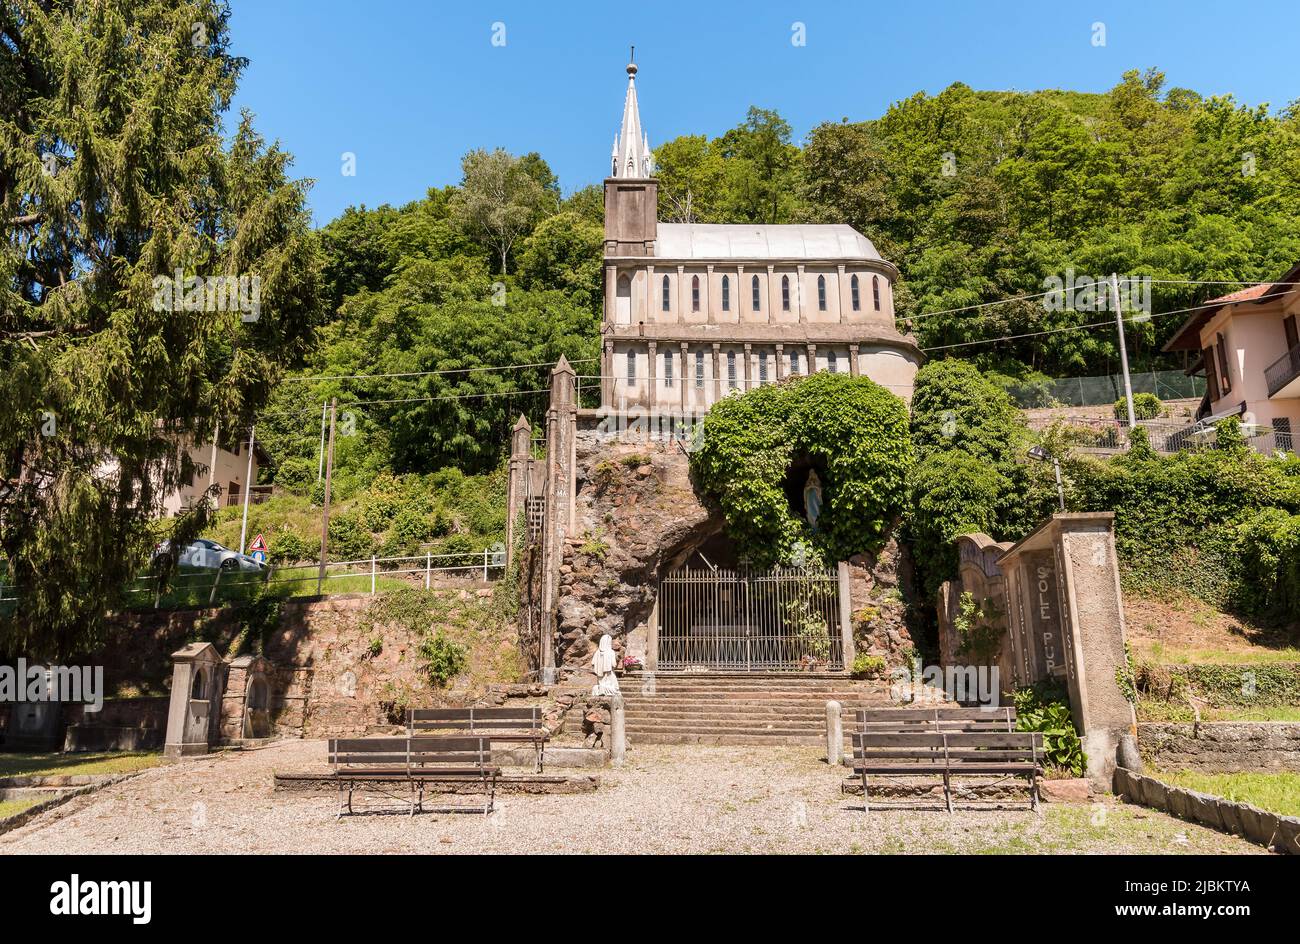 Reproduction of the cave of Lourdes and the Sanctuary in front of Abbey in Ganna, Valganna, province of Varese, Italy Stock Photo